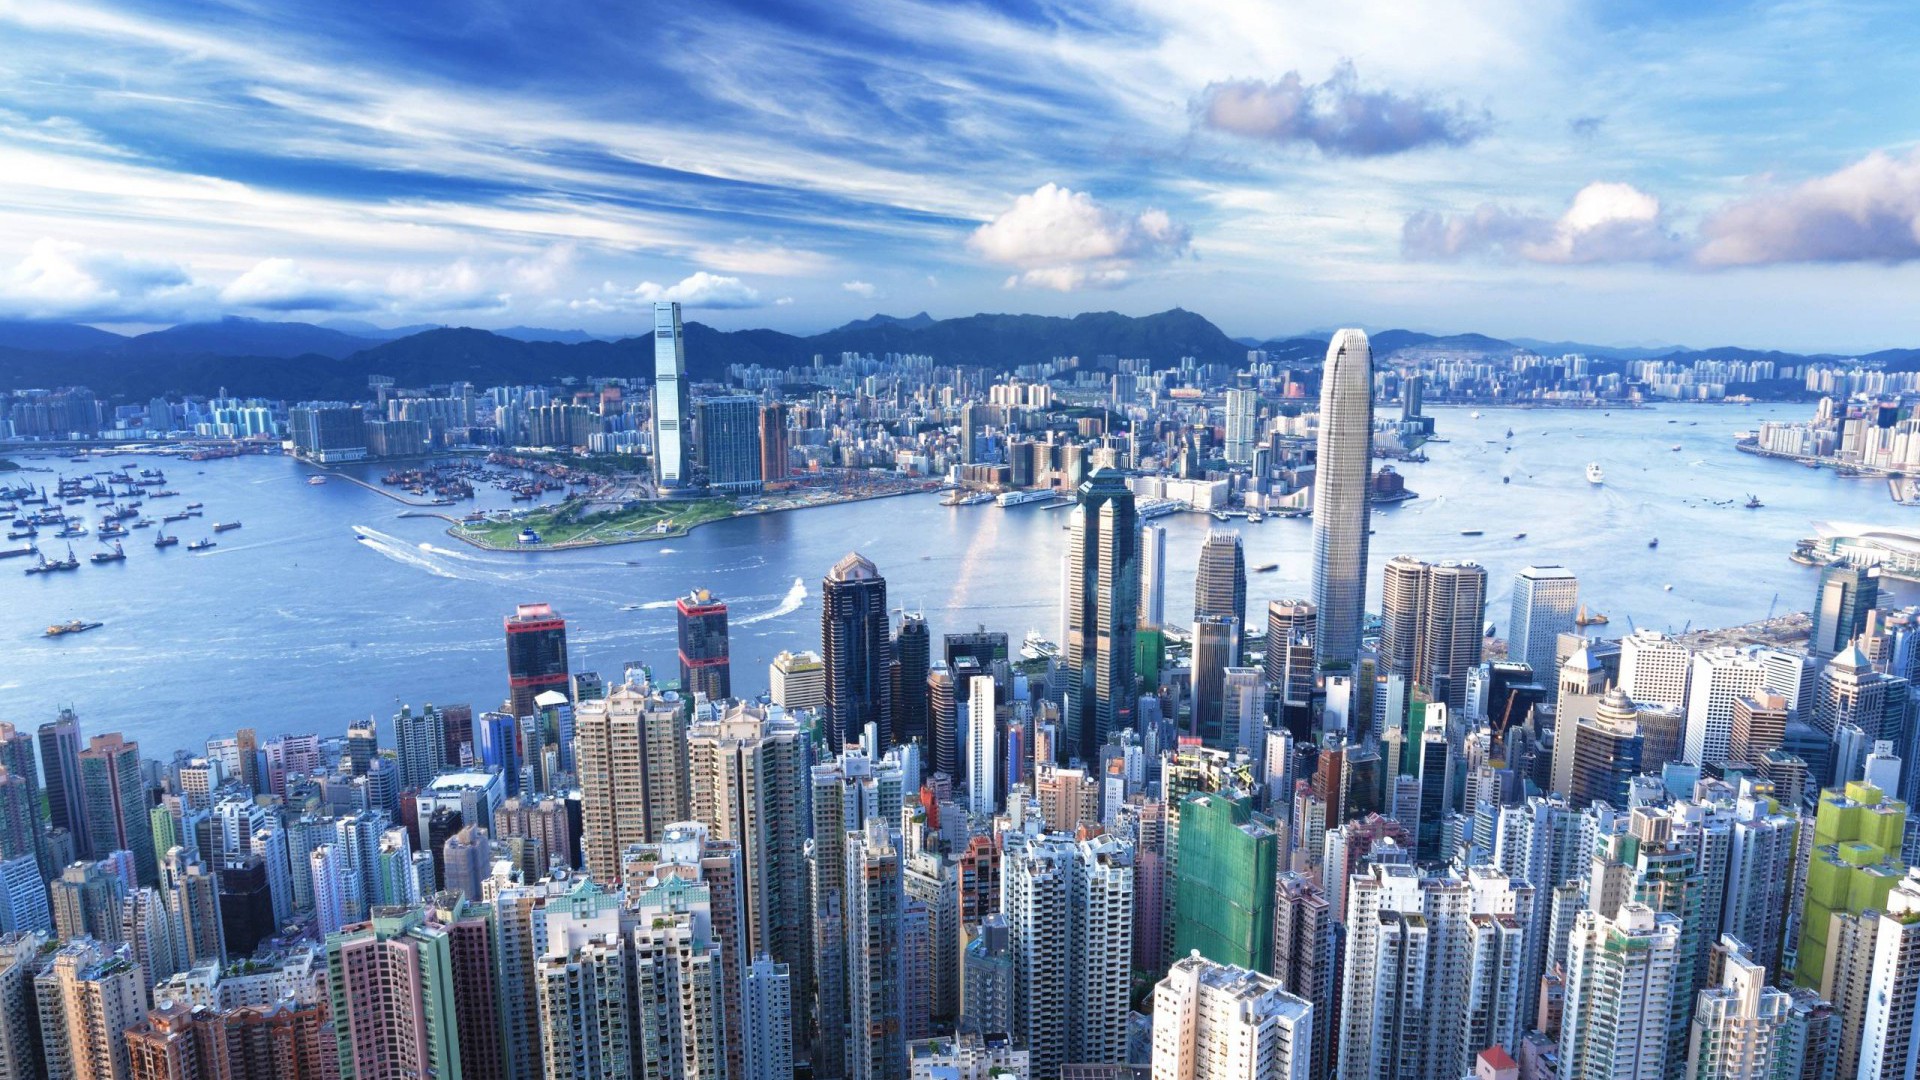 HK Property Index Reaches Record High!